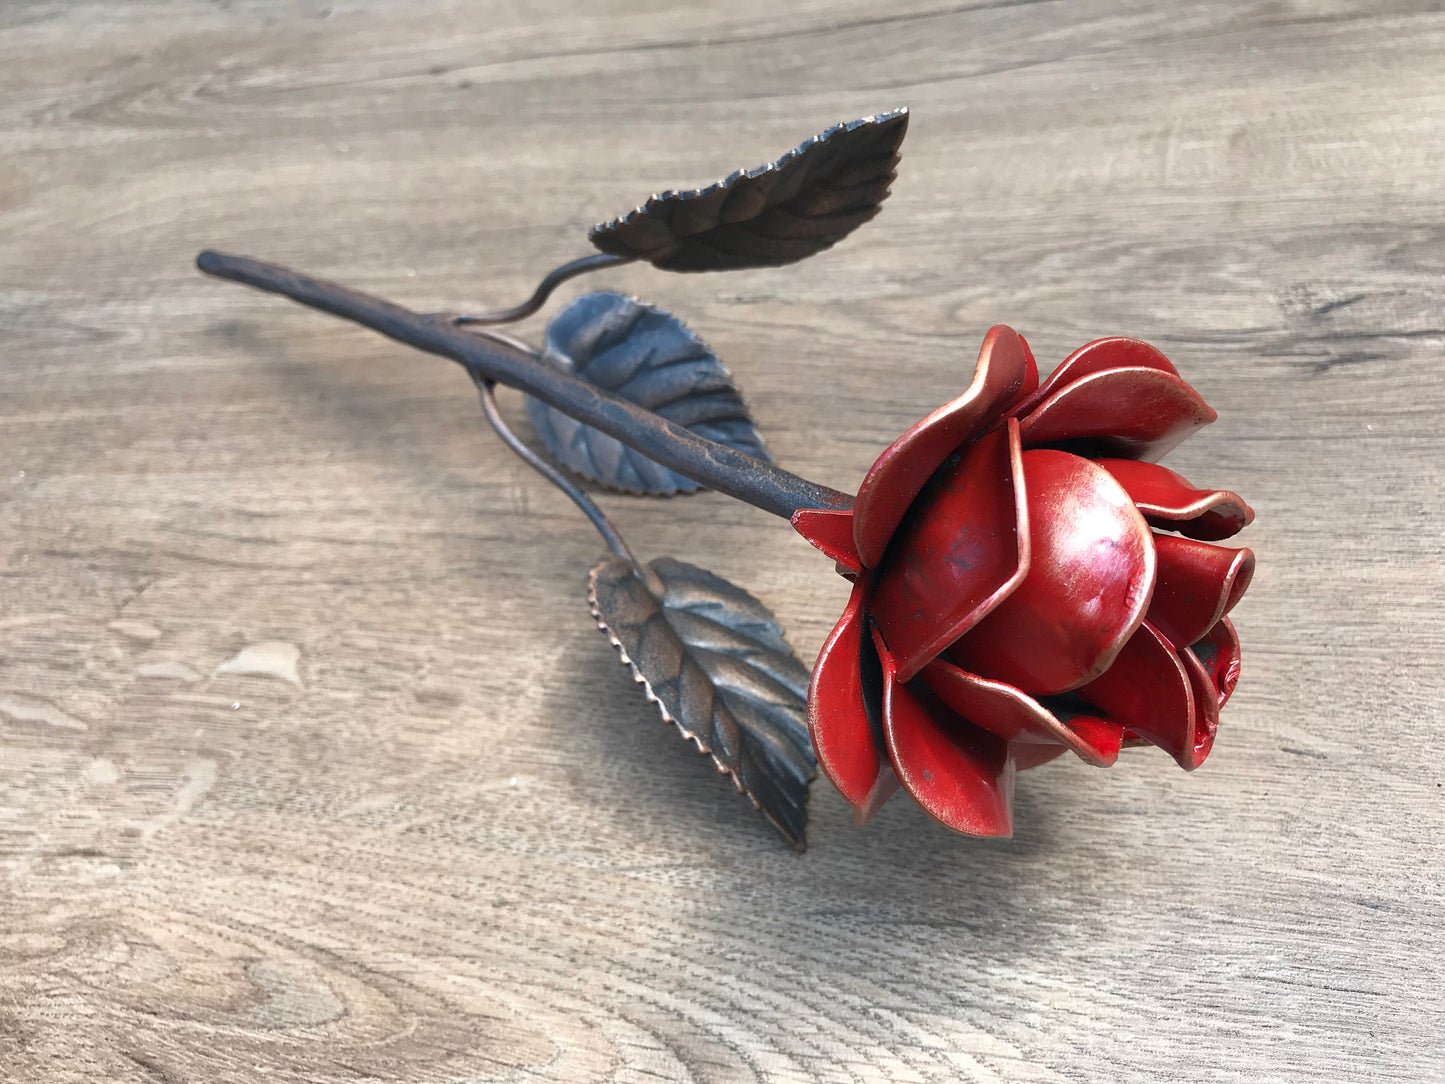 Metal rose, 6th anniversary gift, iron anniversary, hand forged rose, metal sculpture, iron rose, metal roses, steel rose, iron gift for her